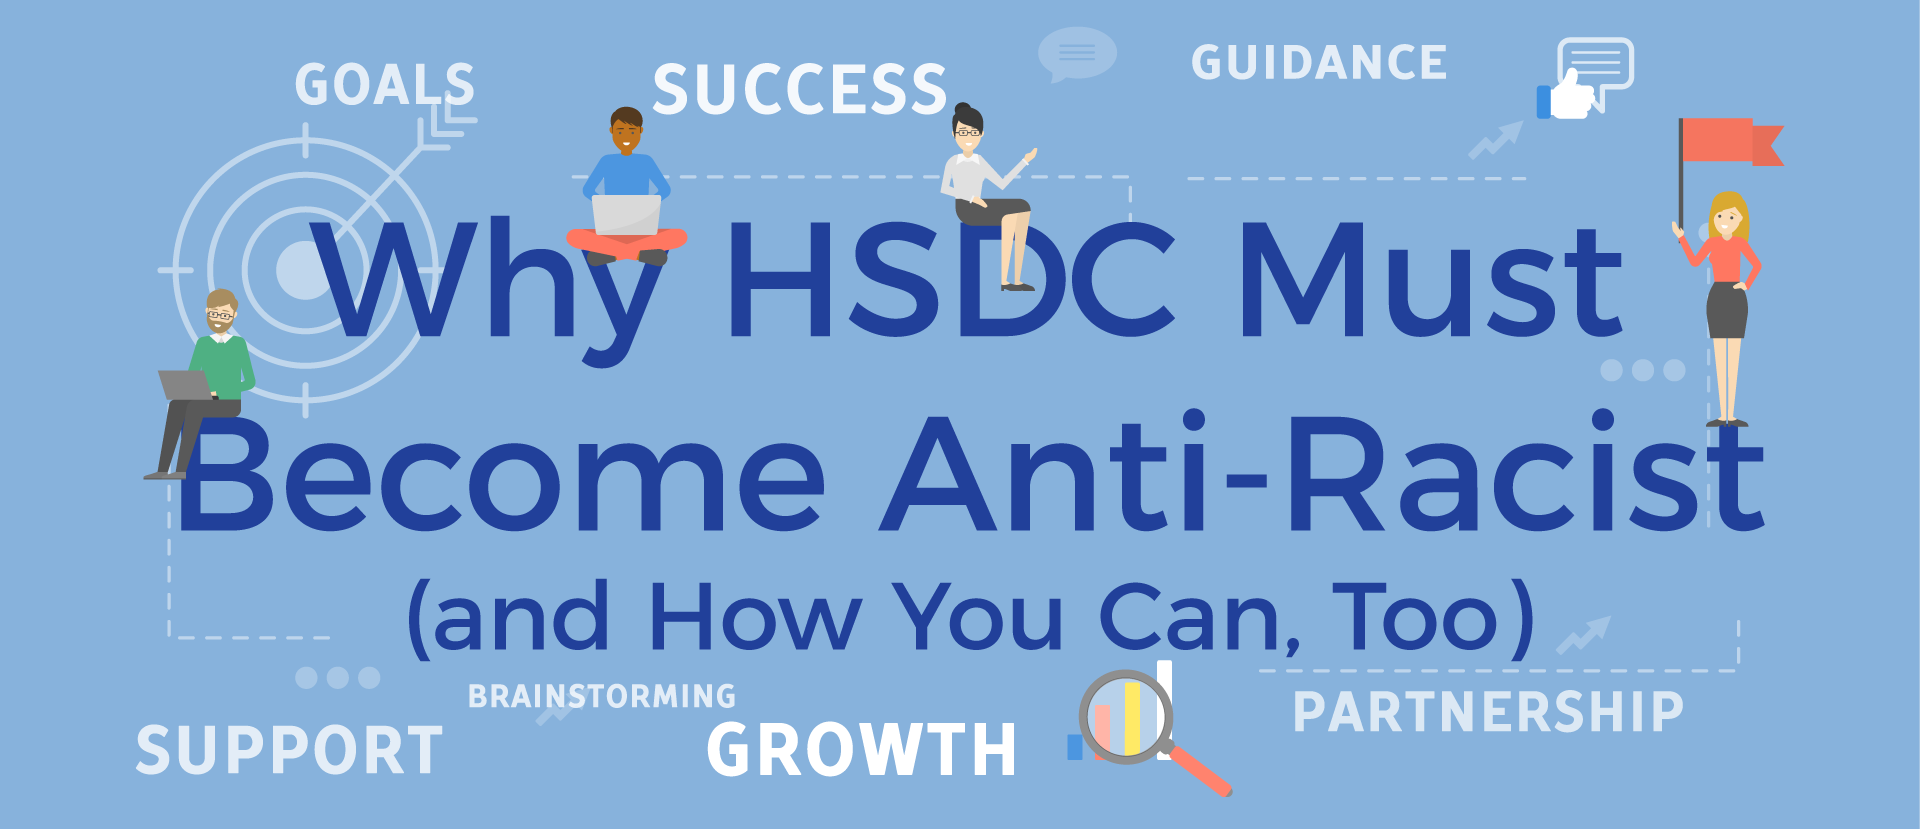 Light blue banner with title of article, "Why HSDC Must Become Anti-Racist (and How You Can, Too)". Around the title are four computer images of smiling people. There are small words around the title: goals, success, guidance, support, brainstorming, growth, partnership).